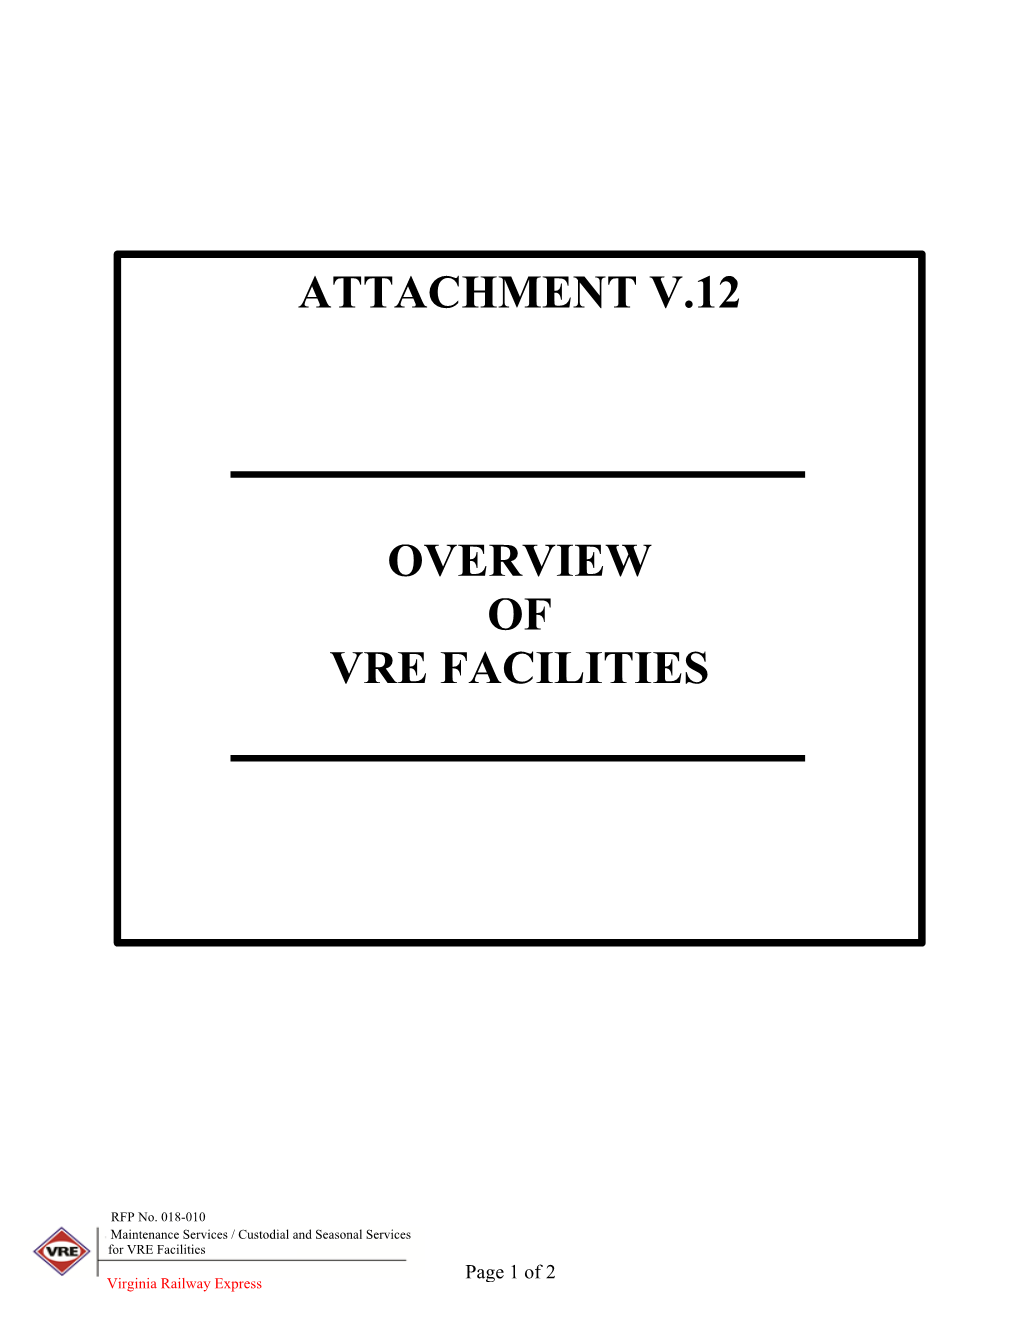 Attachment V.12 Overview of Vre Facilities